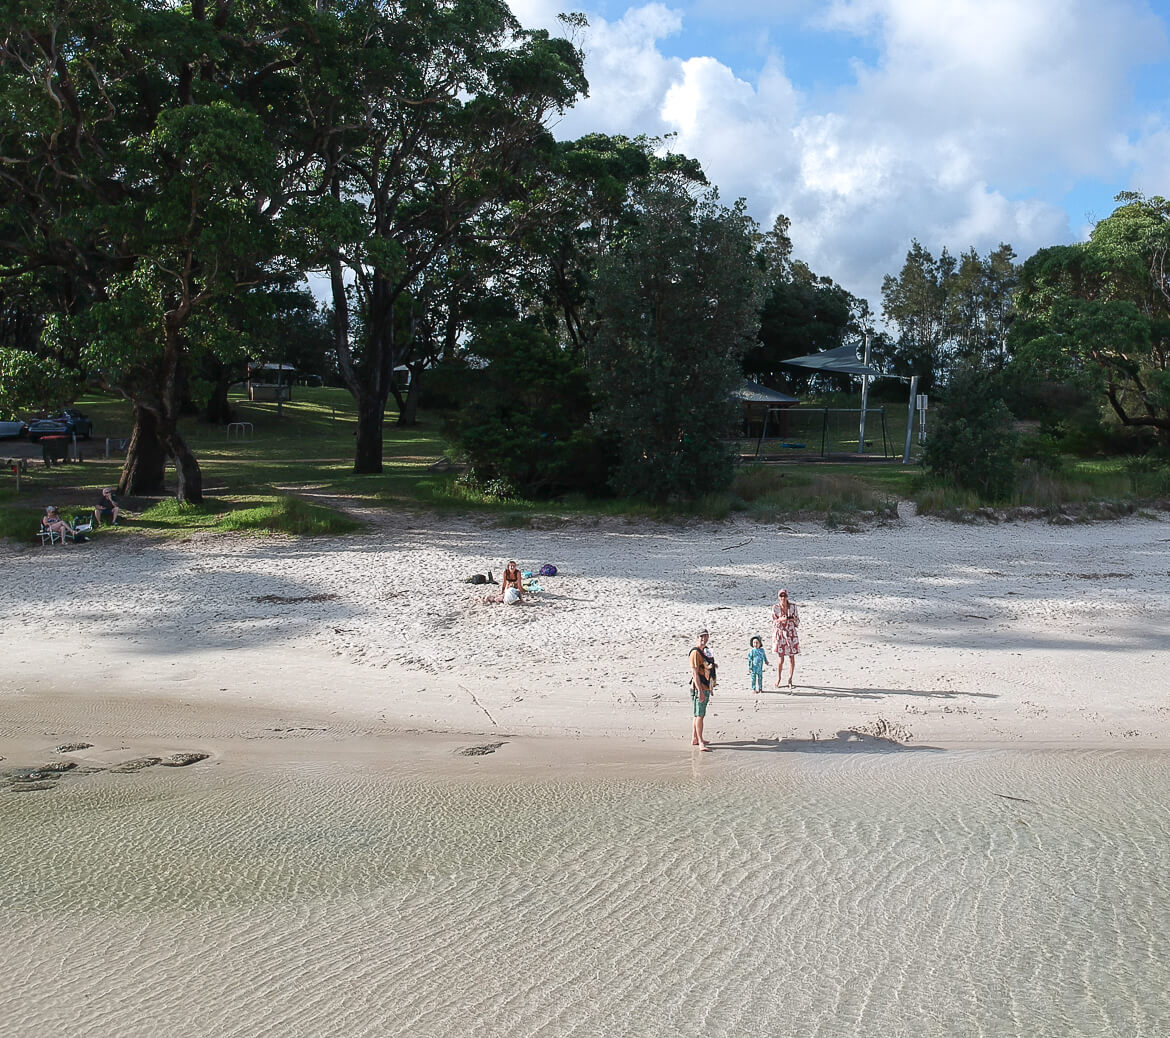 A family enjoying the shallow waters of Moona Moona Creek in Huskisson